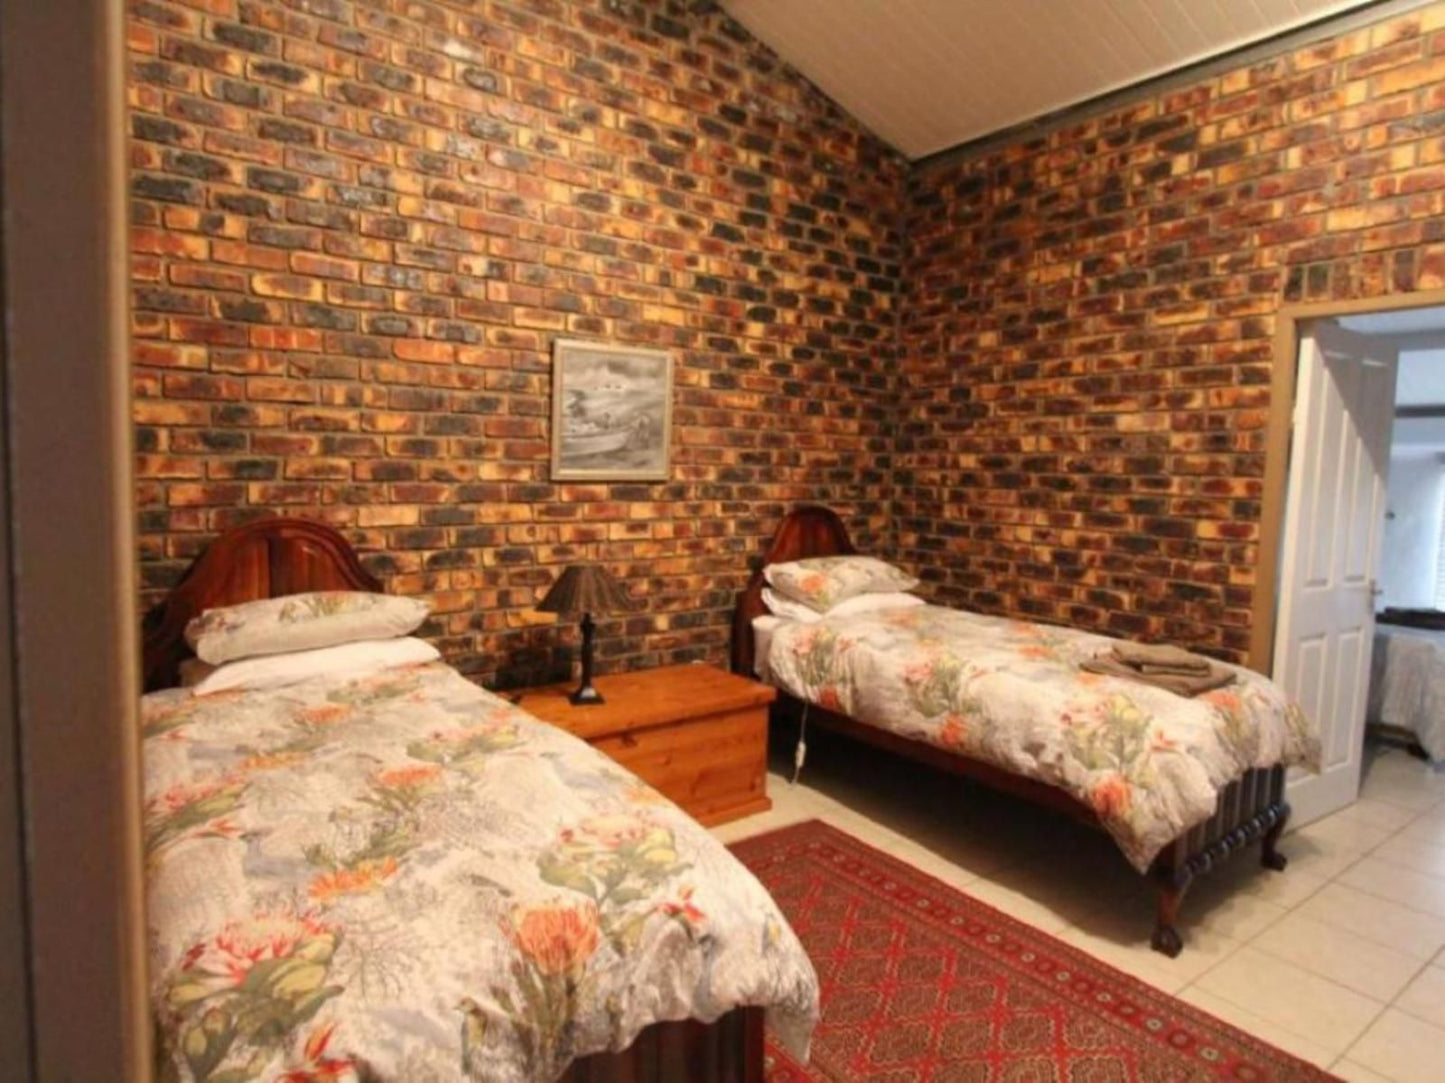 Clanwilliam Accommodation Clanwilliam Western Cape South Africa Bedroom, Brick Texture, Texture